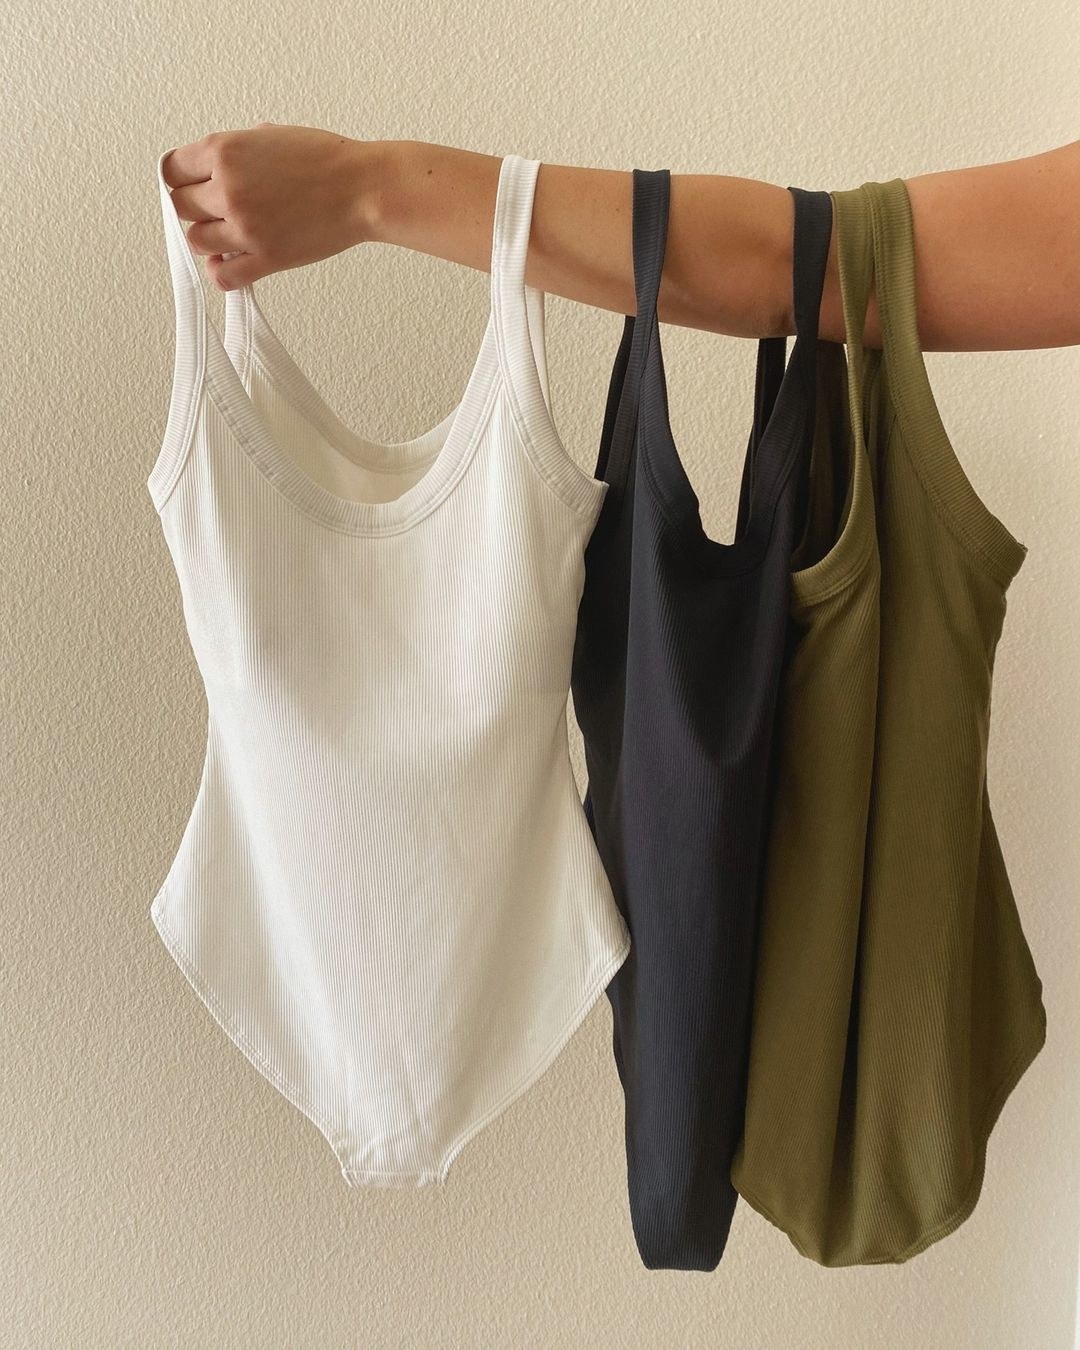 Three bodysuits hanging off of an arm